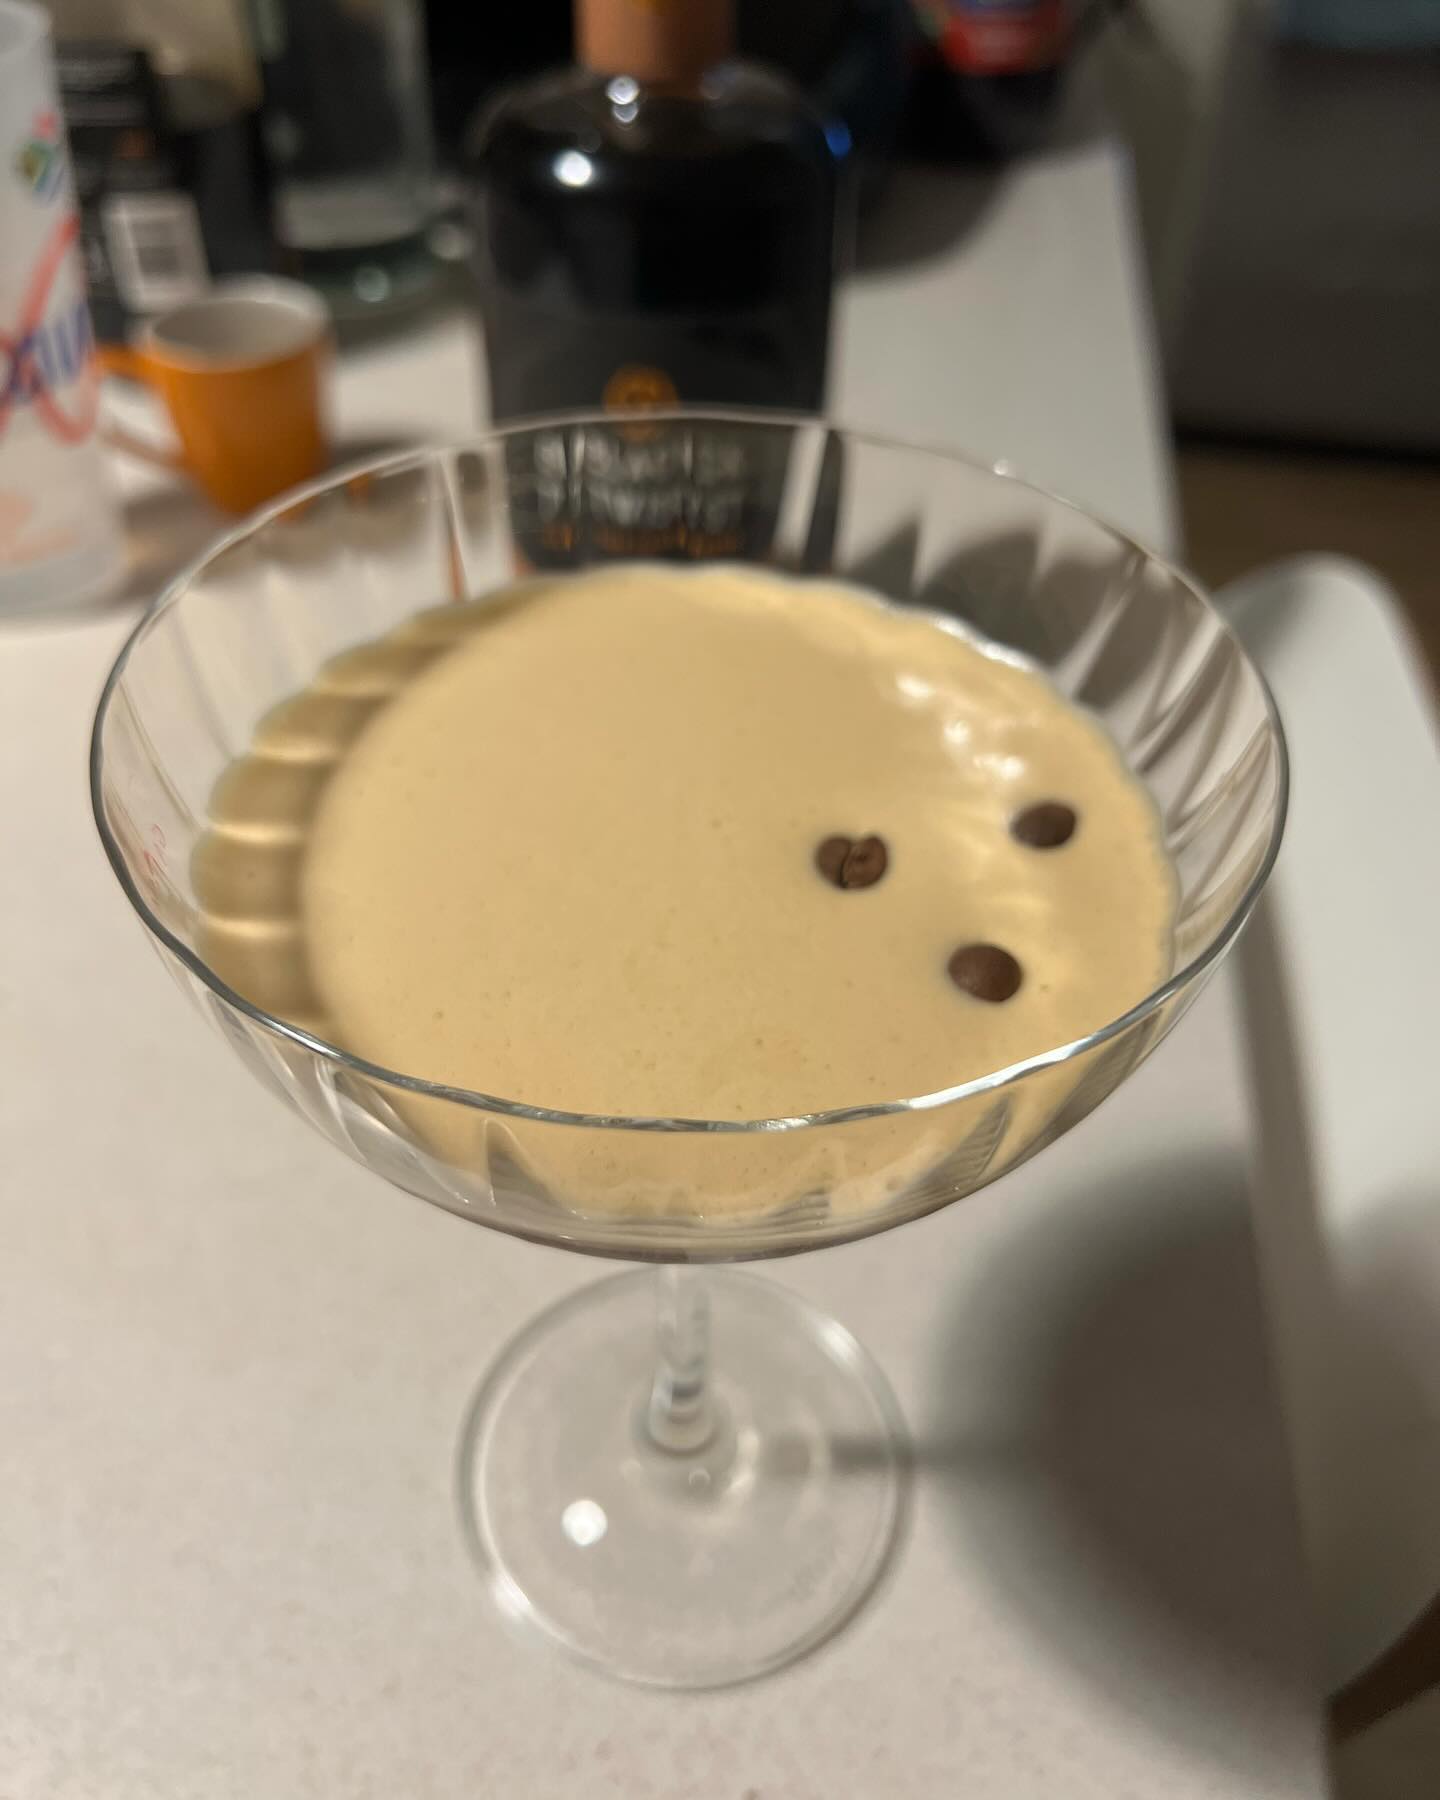 Trying out the @blacktwisthc espresso martini! ️